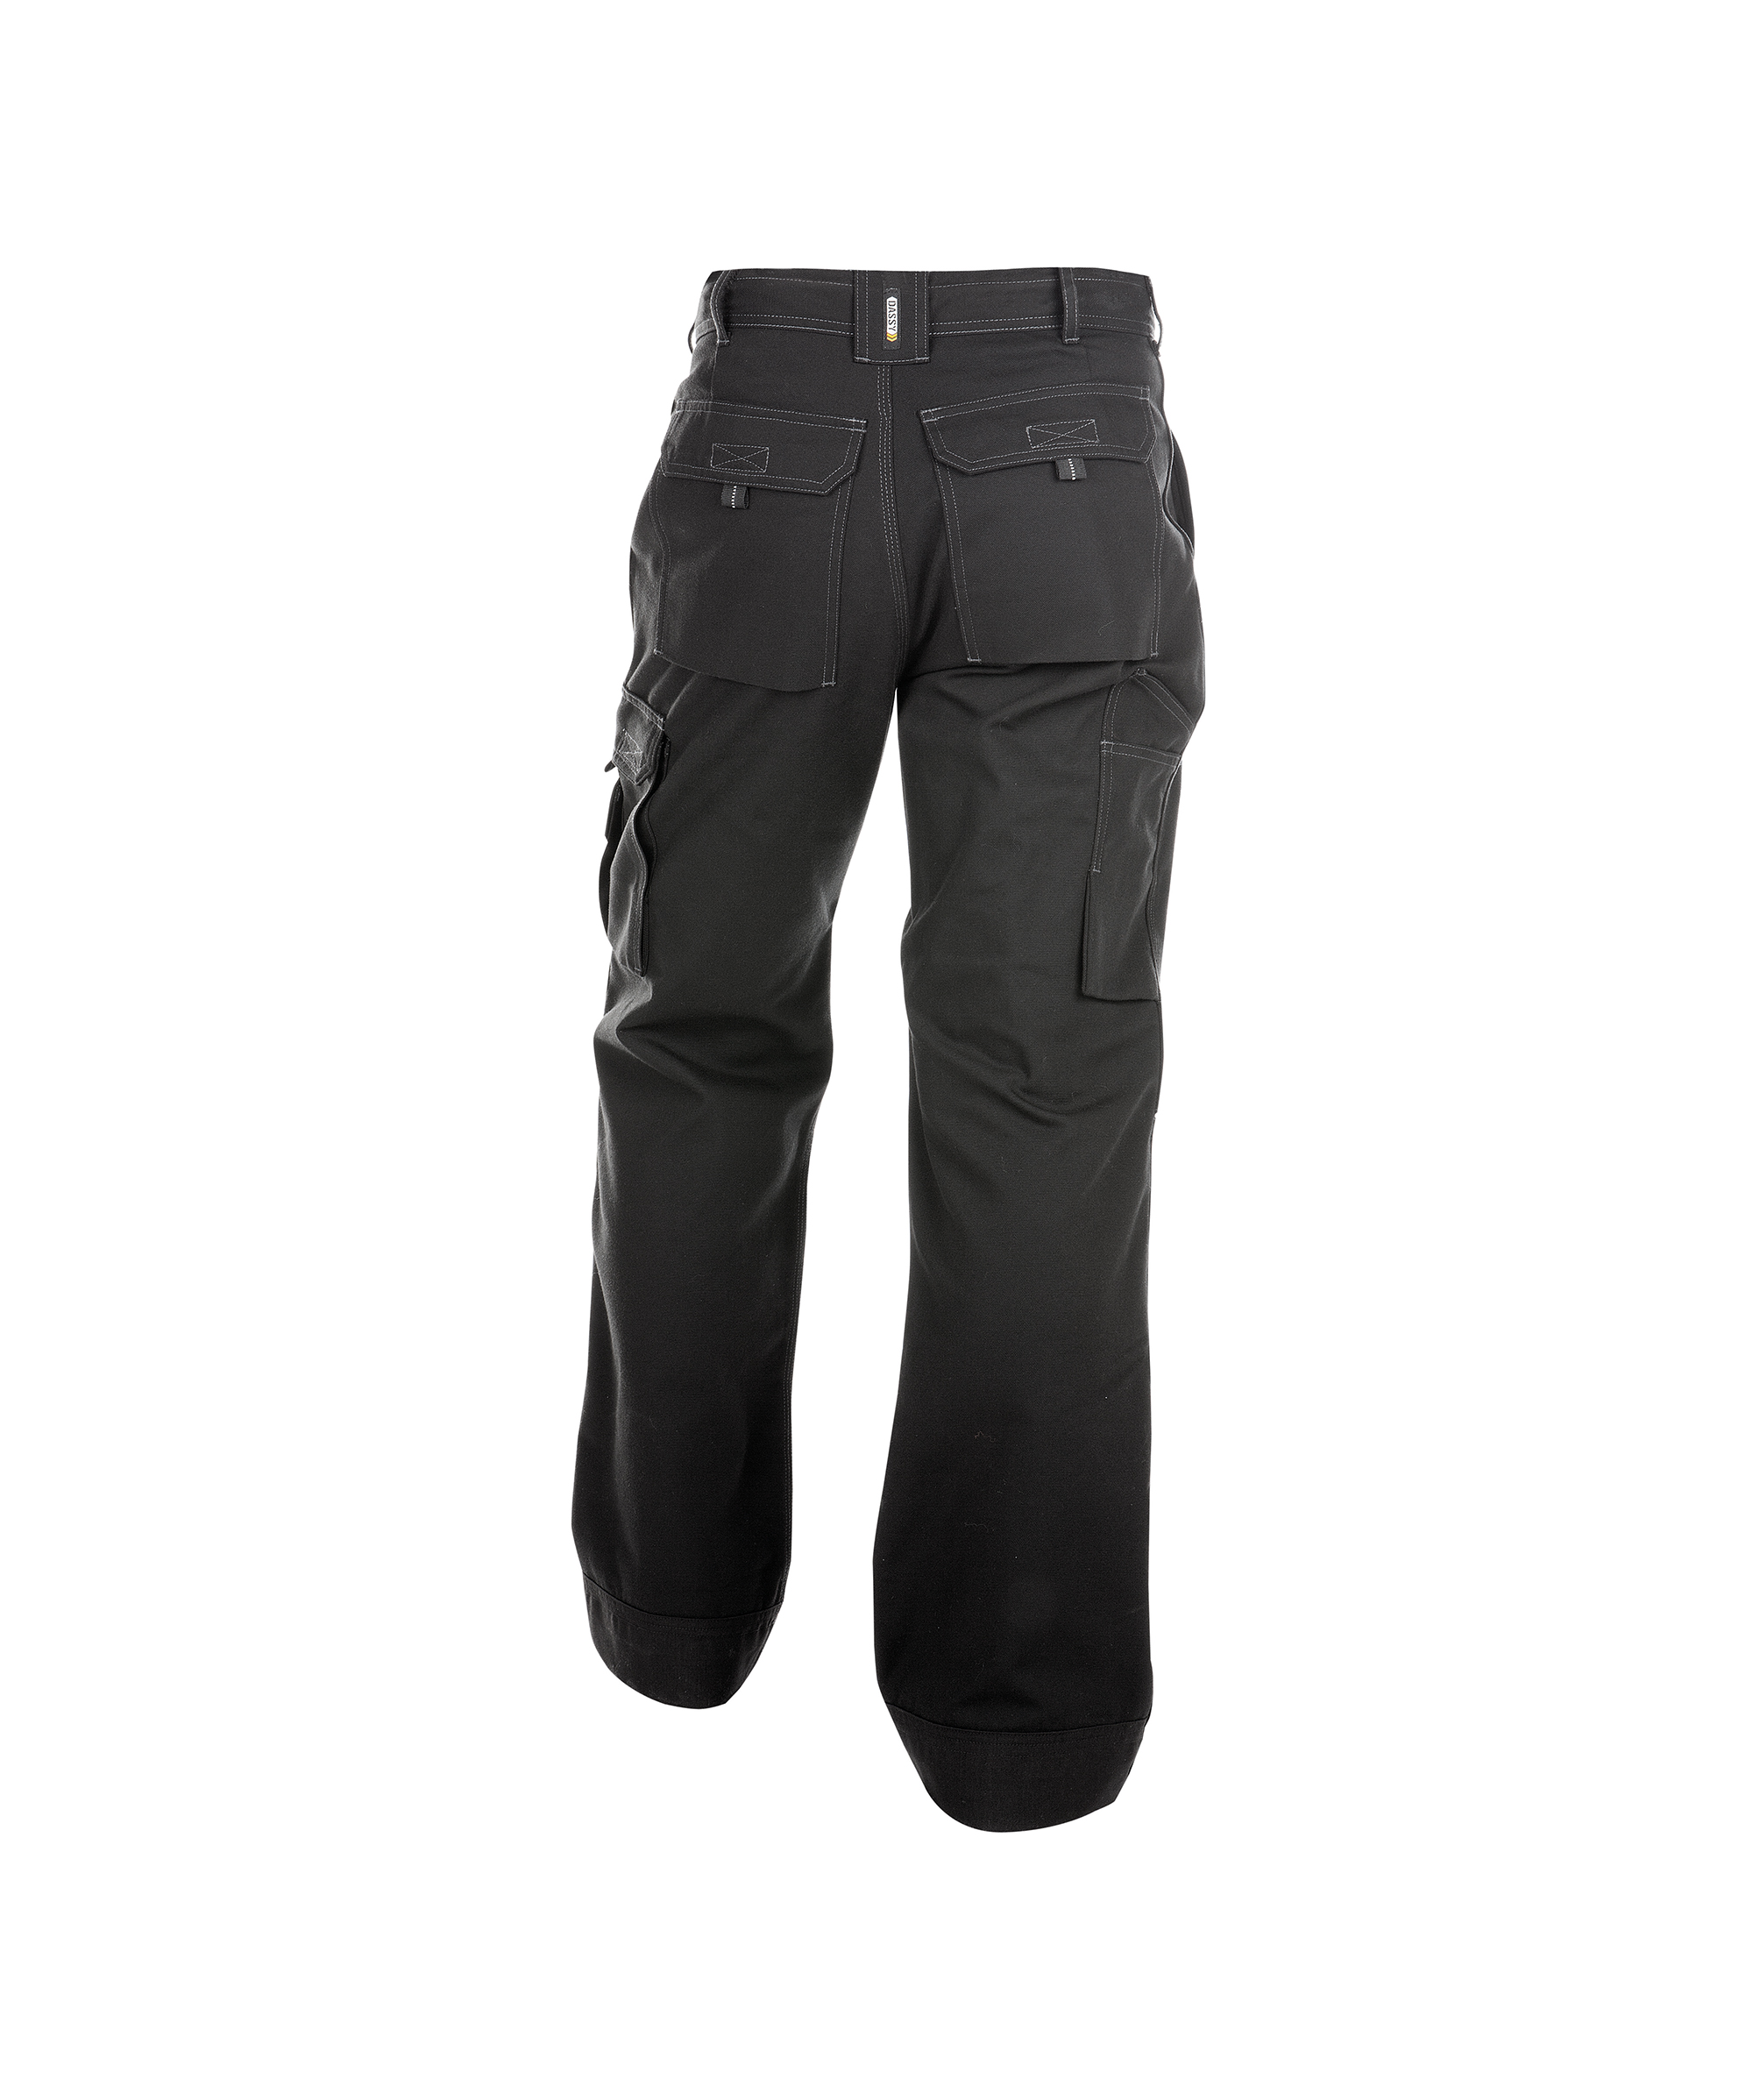 jackson_canvas-work-trousers-with-knee-pockets_black_back.jpg